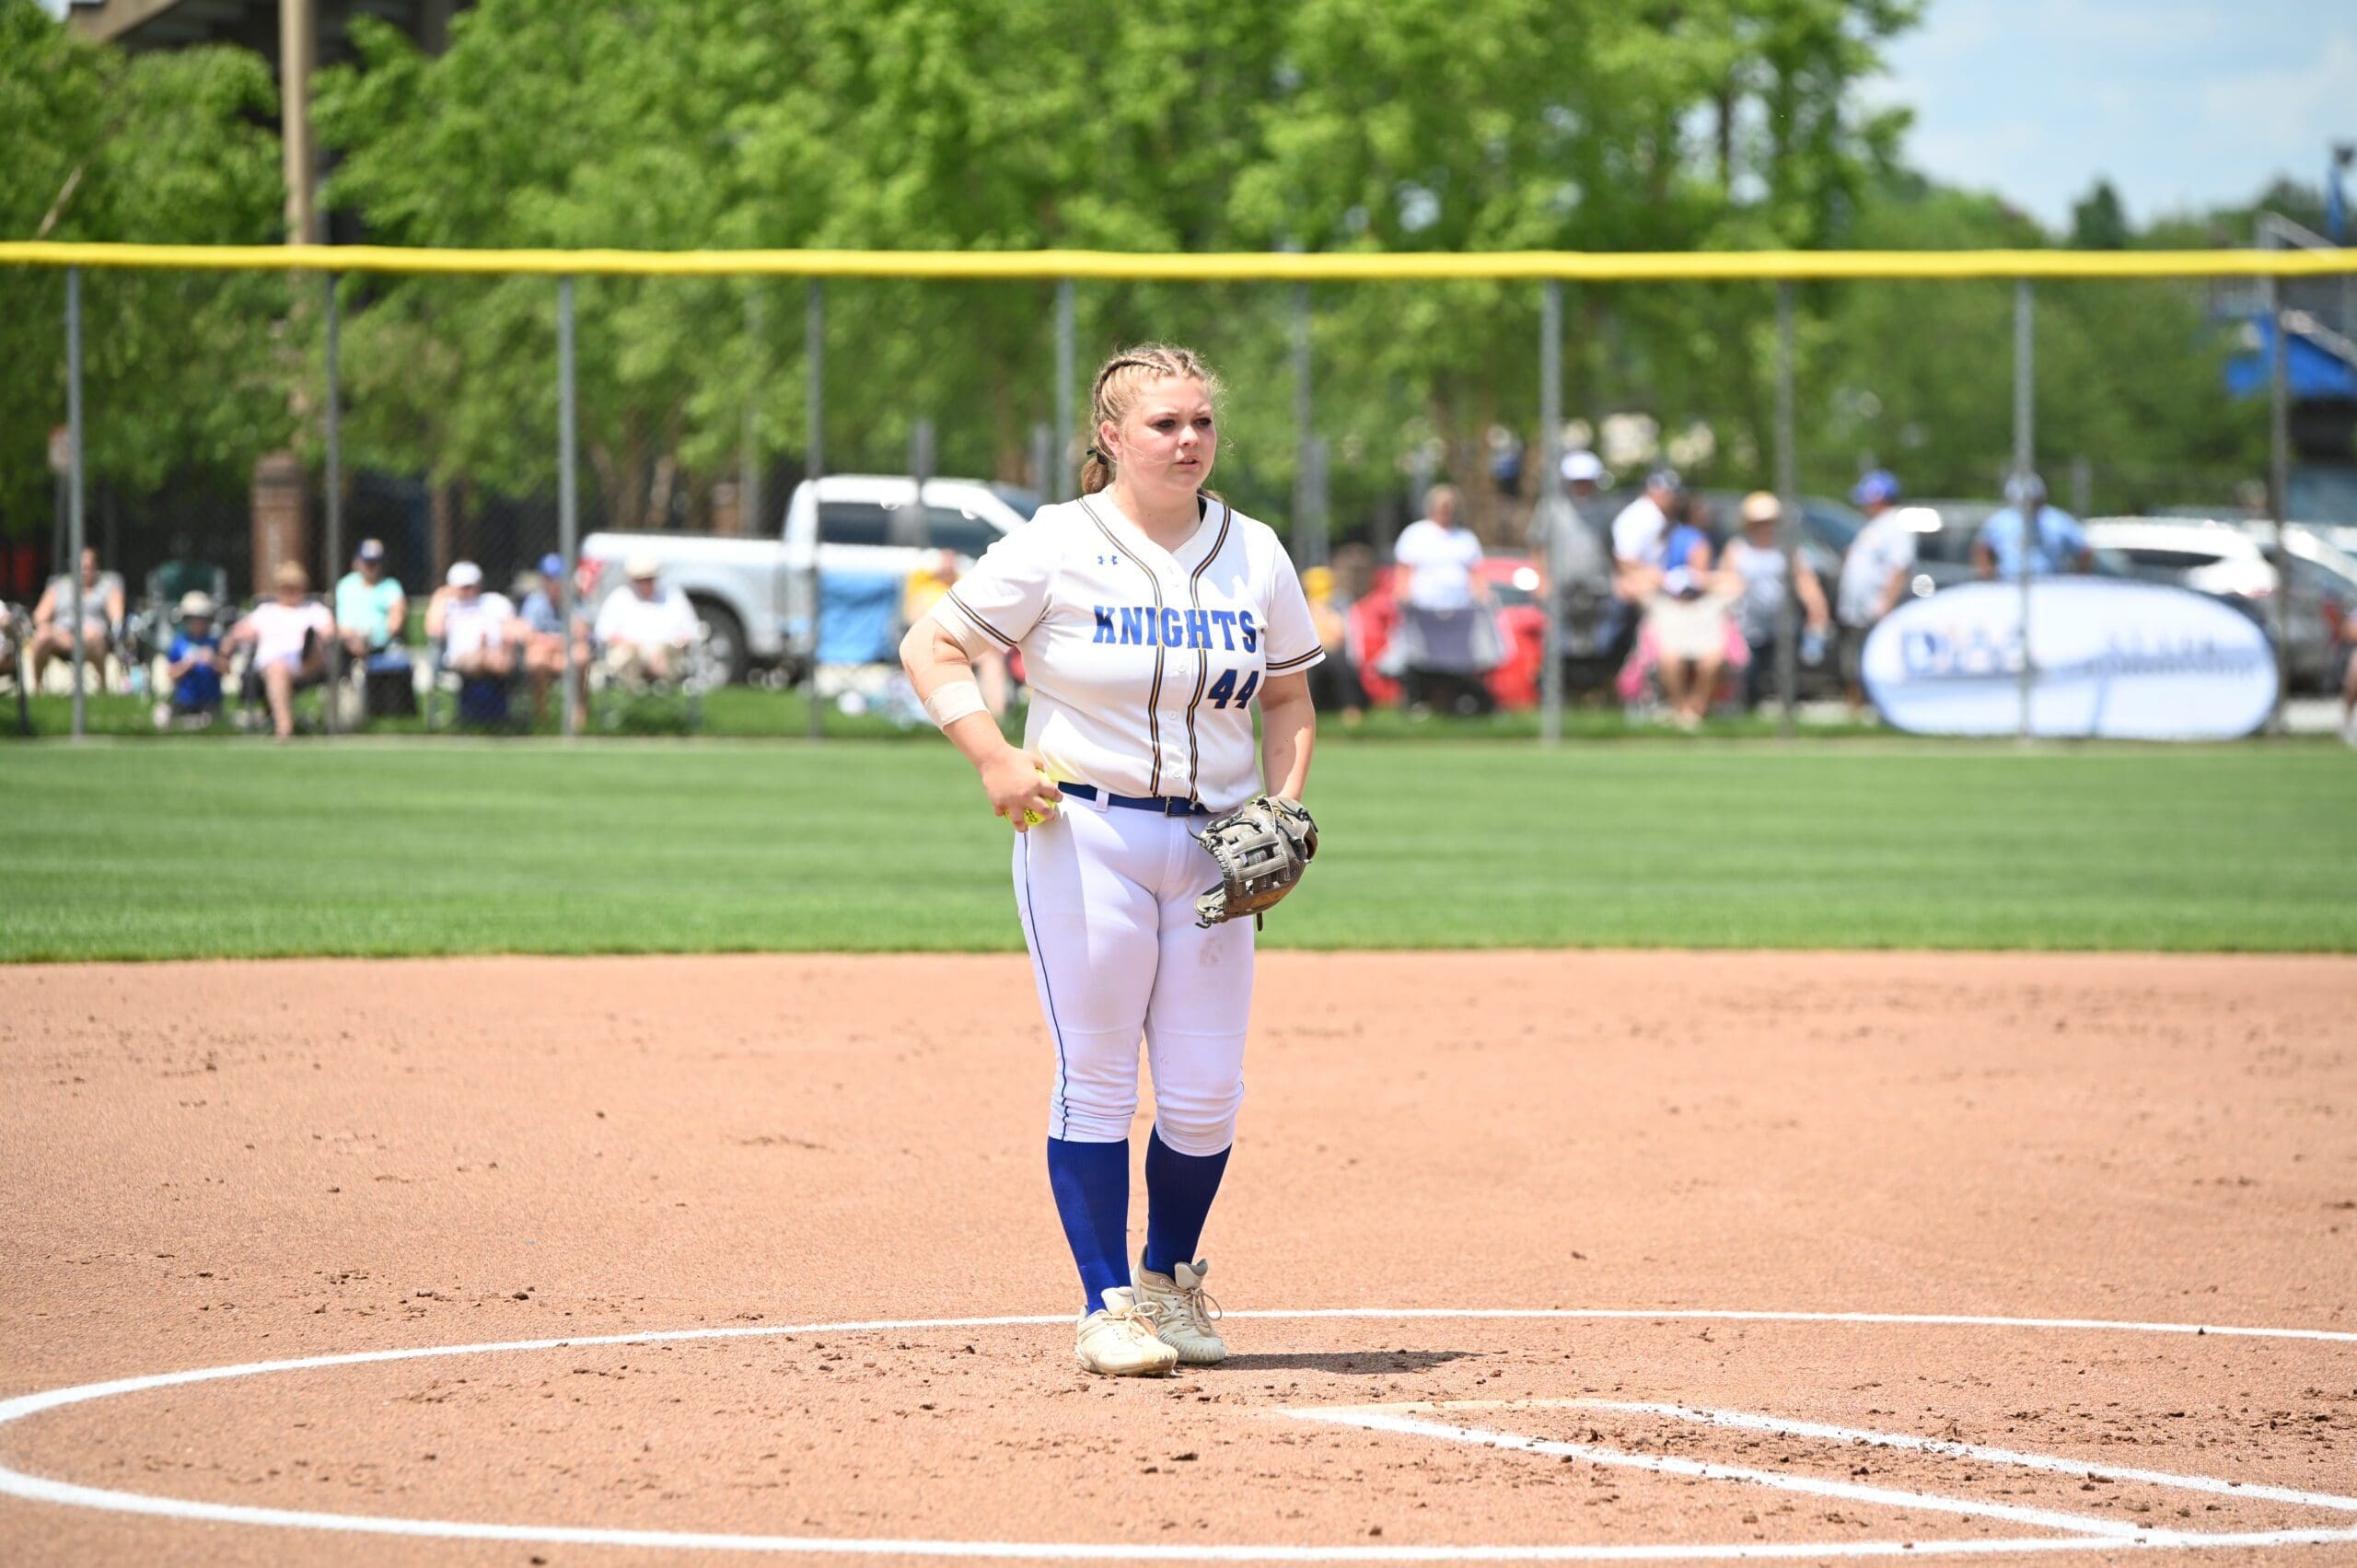 Madge Layfield of Sussex Central softball about to wind up for a pitch photo by Nick Halliday scaled